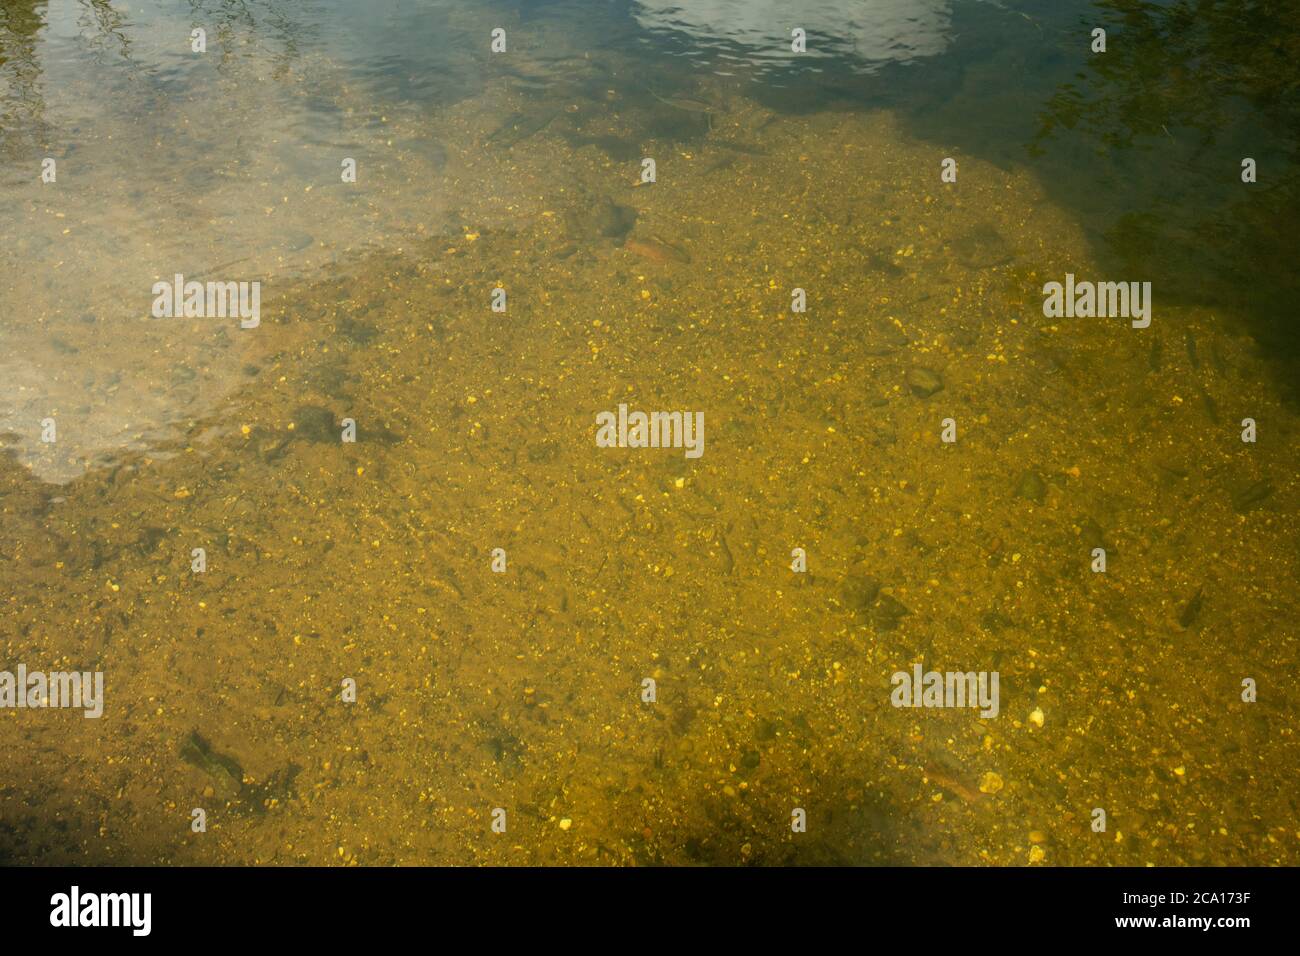 An image of how clear the water is at horstead mill in norfolk on a summers day showing small fish in the river Stock Photo